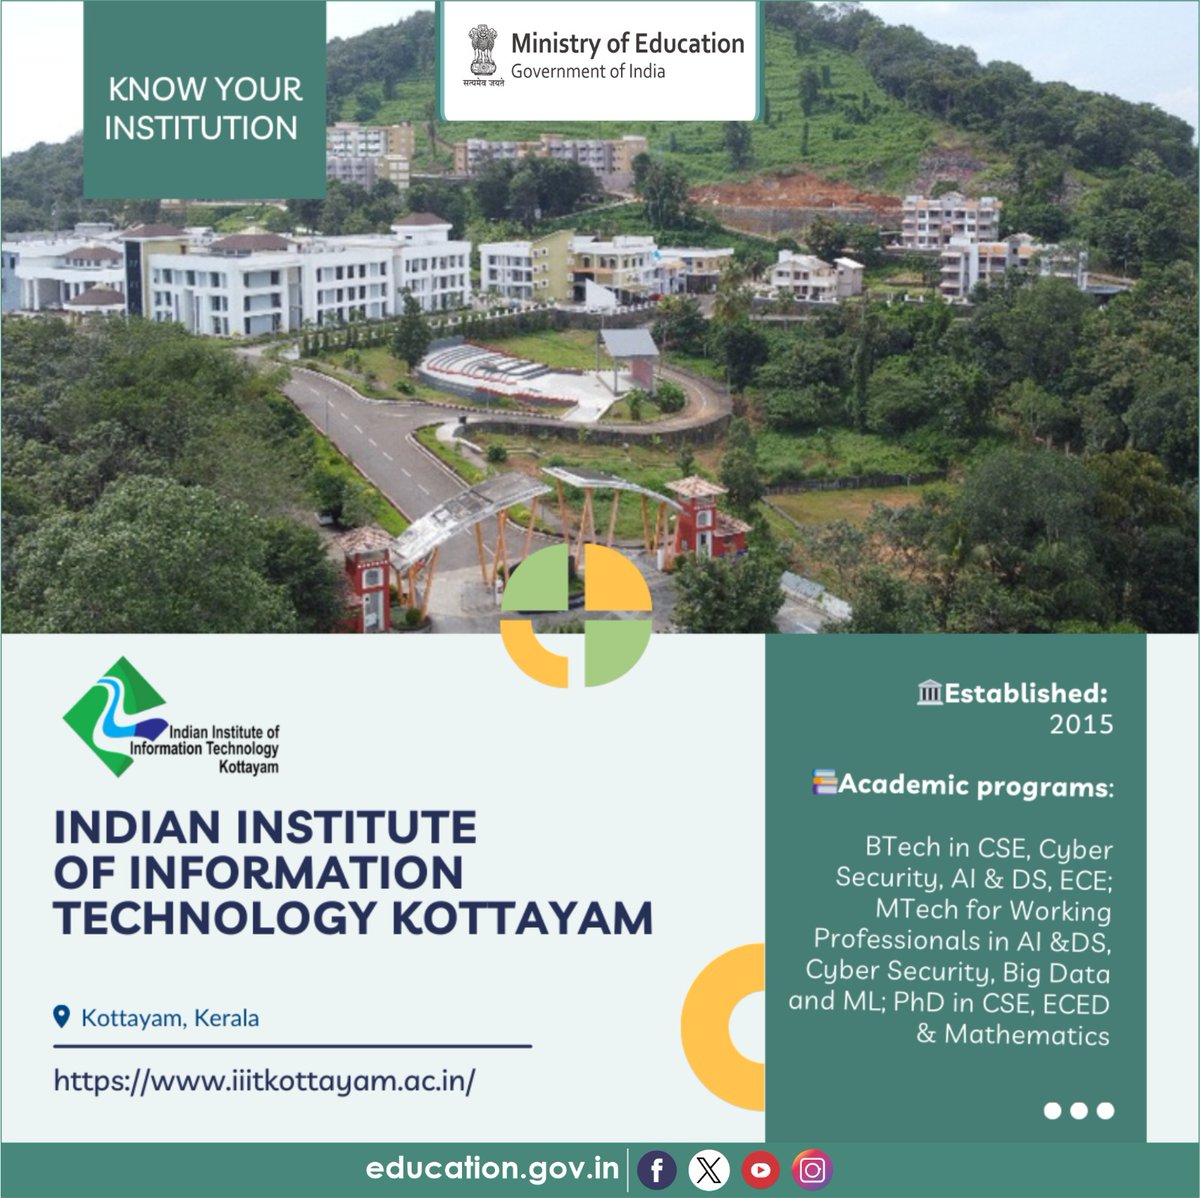 Know about the HEIs of India! Established in 2015, the Indian Institute of Information Technology Kottayam (IIIT Kottayam) was declared as an Institution of National Importance in 2017. The campus is located at Valavoor, Pala, Kottayam - a pictorial location spread over 53 acres